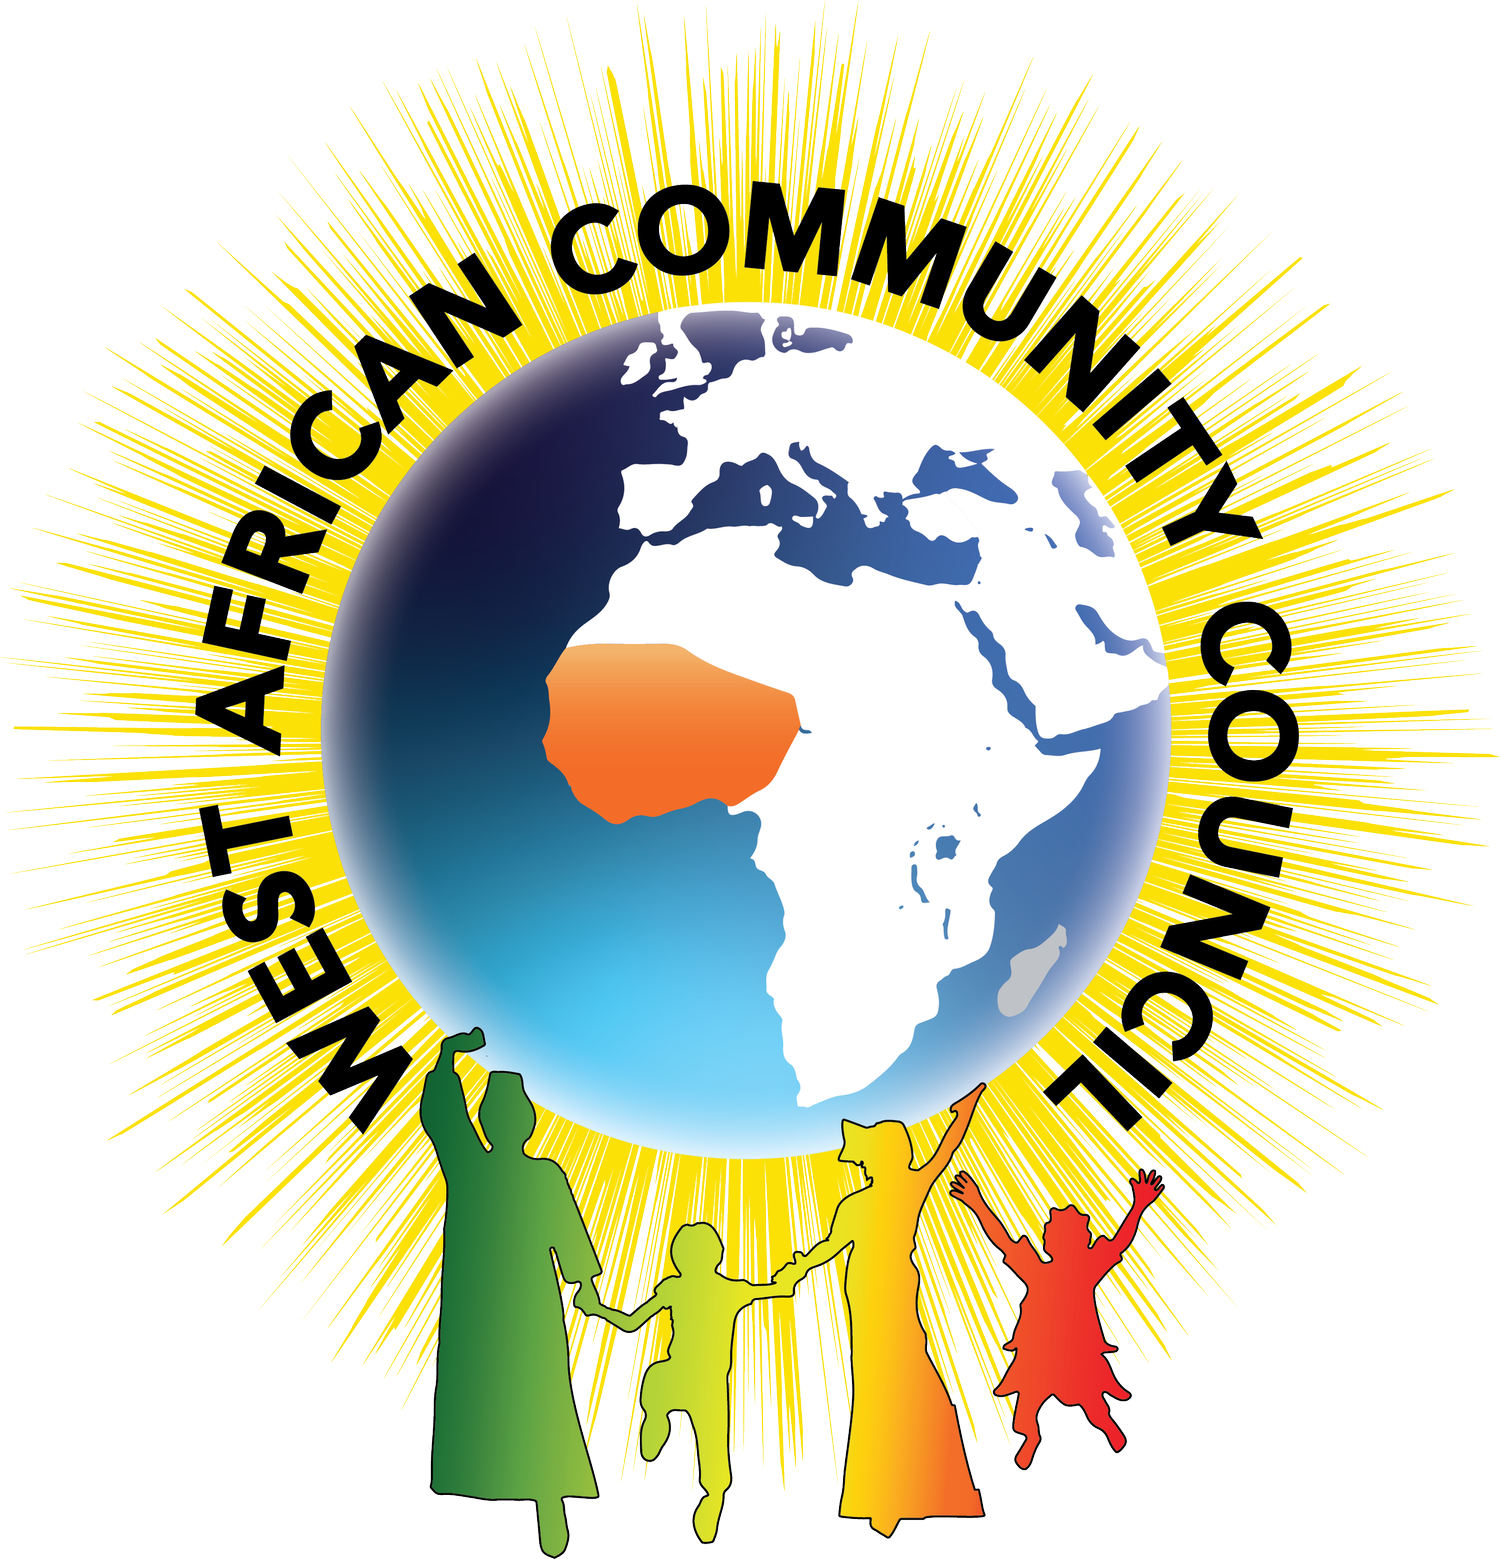 West African Community Council